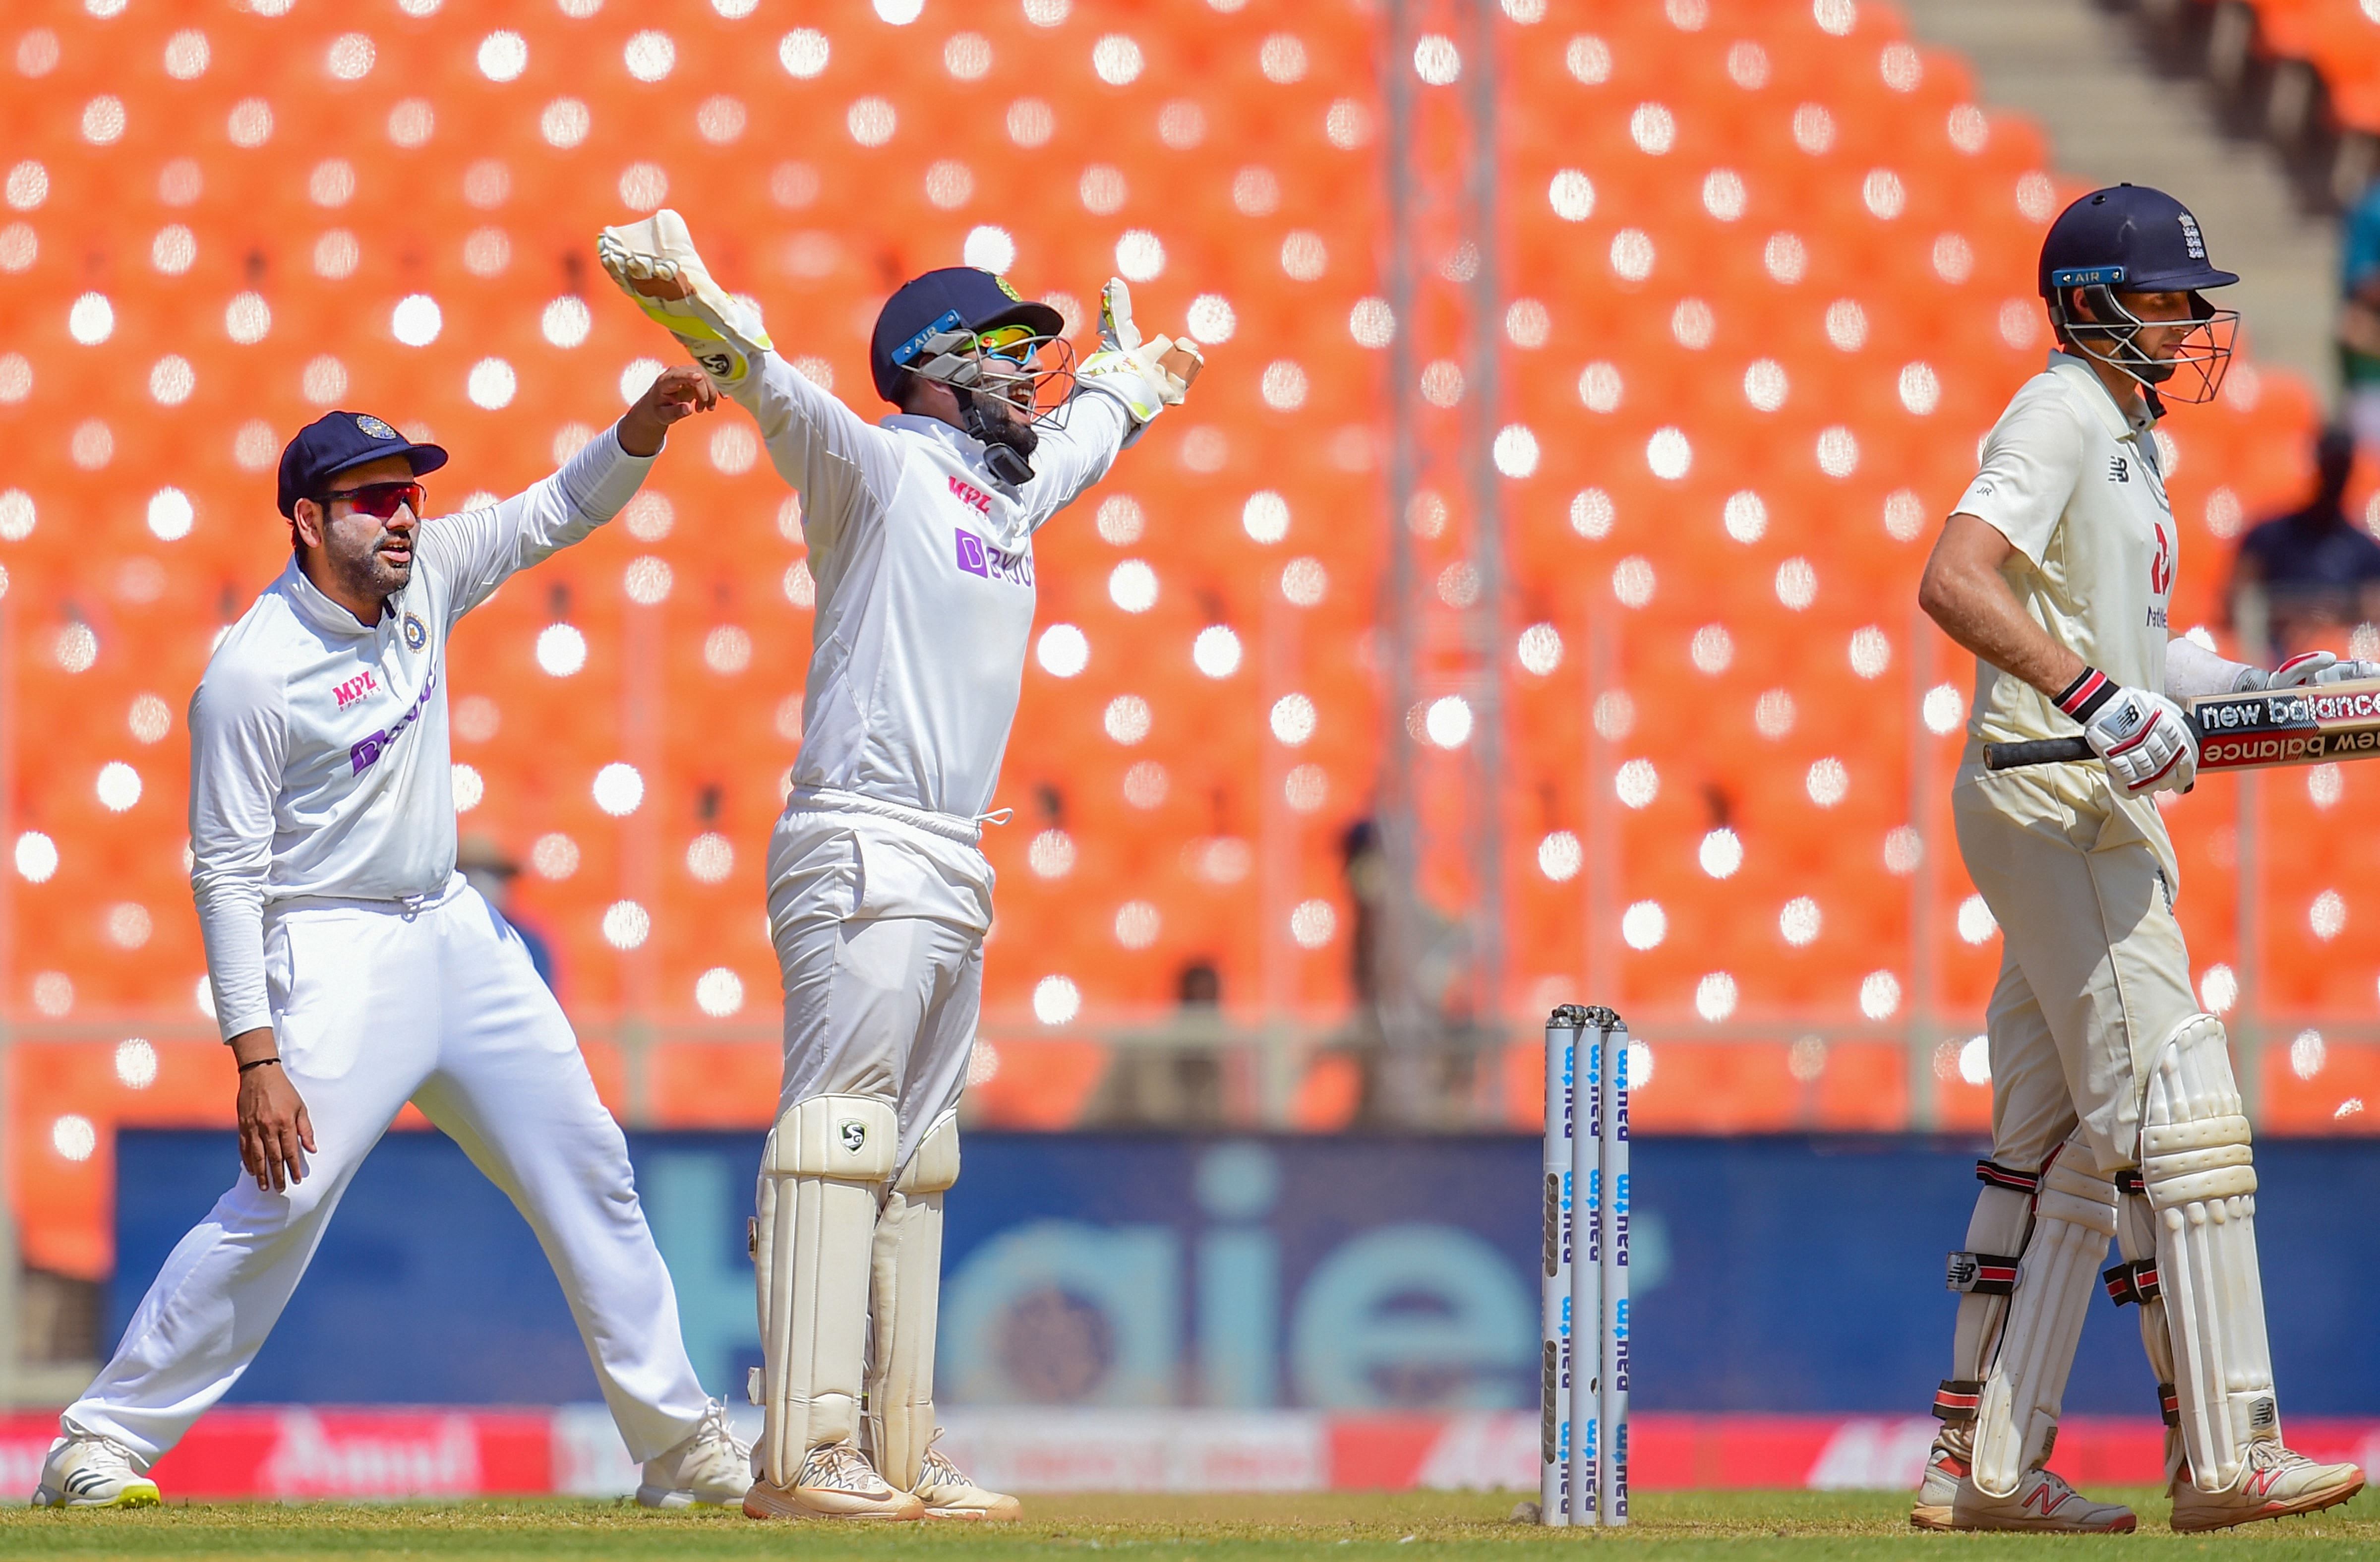 Indian wicket-keeper R Pant with teammate Rohil Sharma celebrates the wicket of England batsman Joe Root during the third day of the 4th and last cricket test match between India and England, at the Narendra Modi Stadium in Ahmedabad, Saturday, March 6, 2021. Credit: PTI Photo